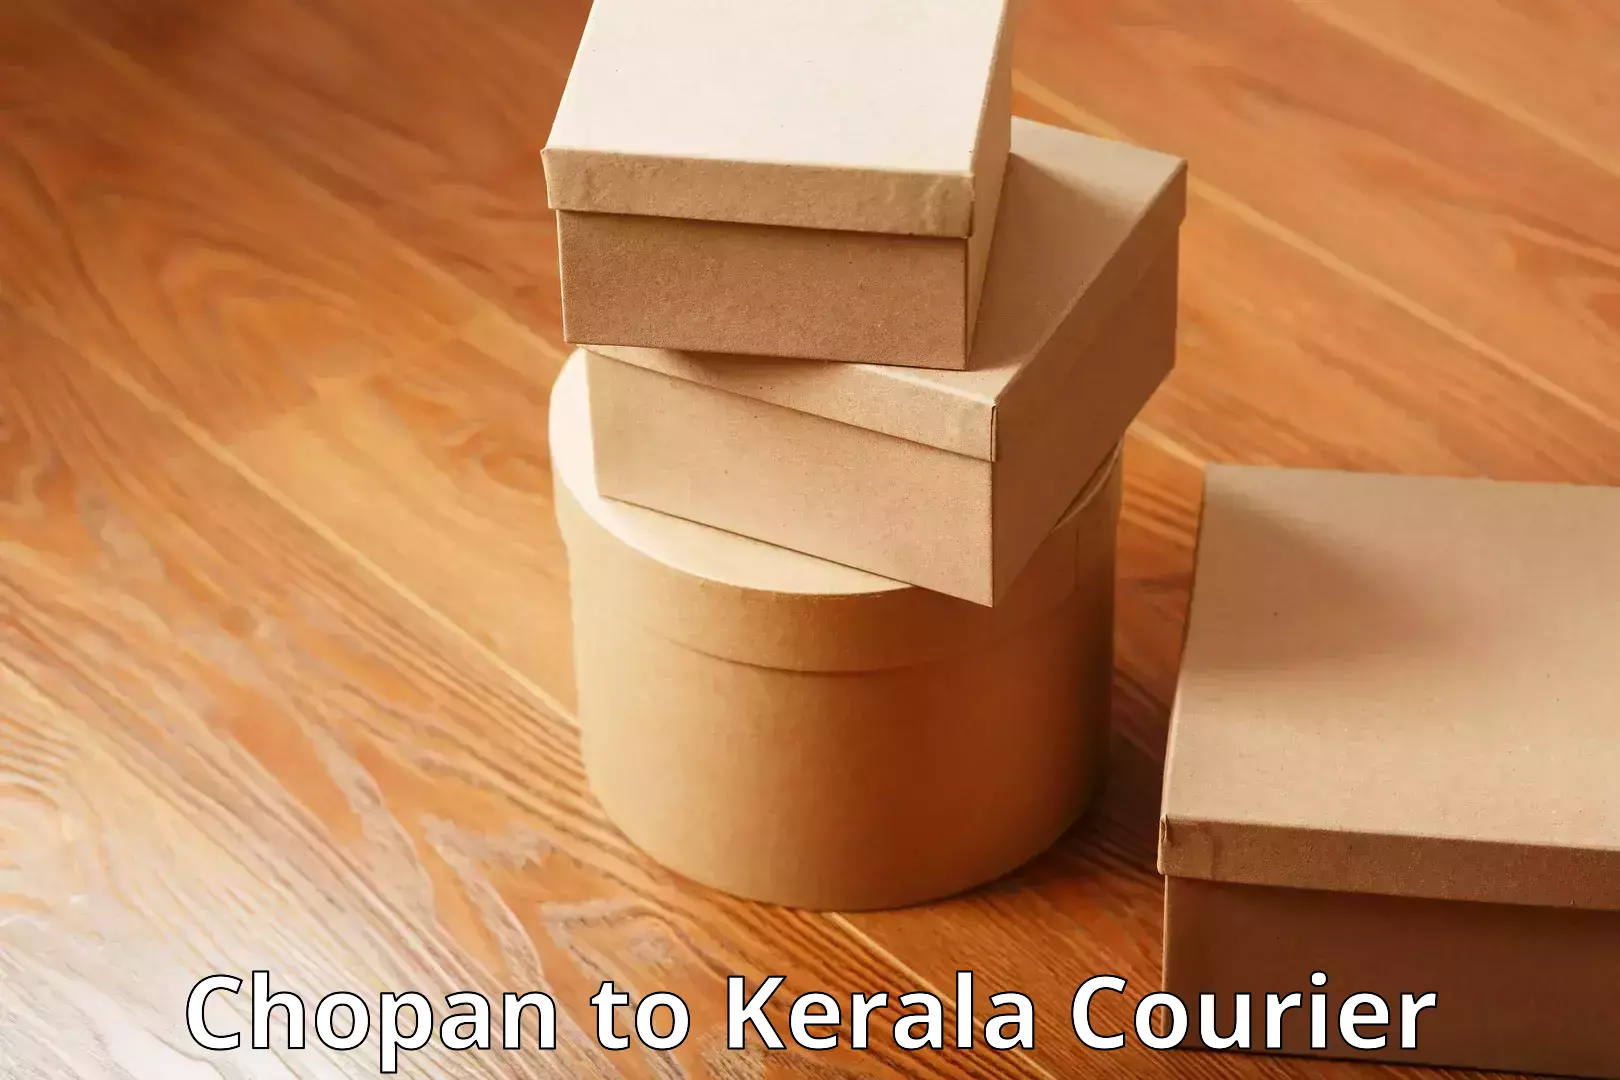 Luggage shipment specialists in Chopan to Kerala